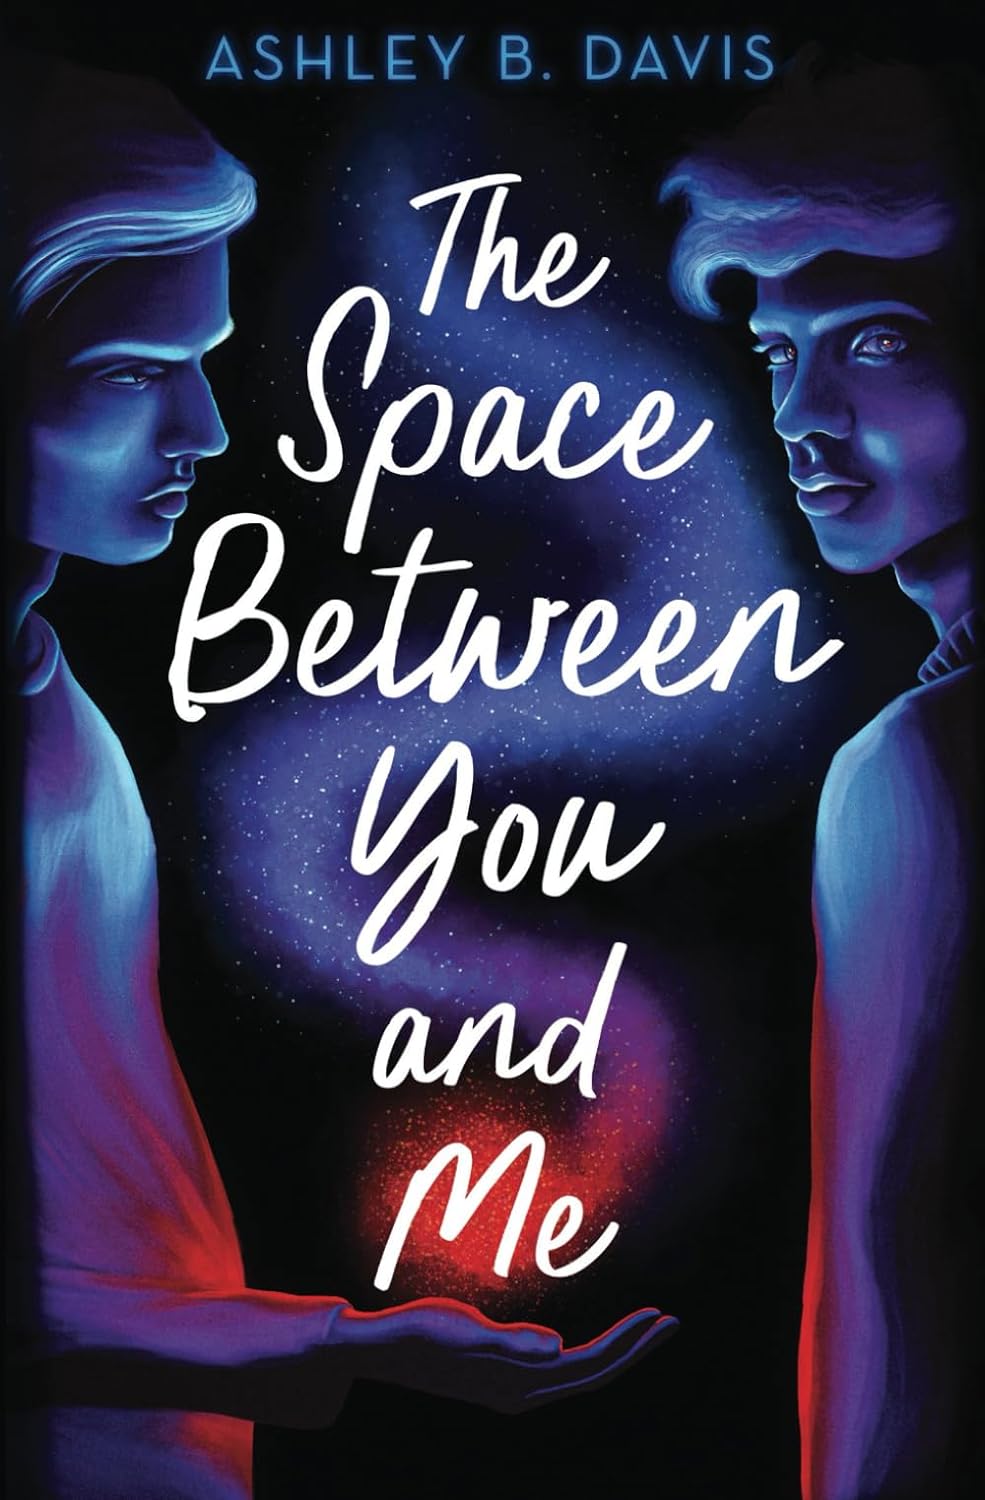 The Space Between You and Me - Ashley B. Davis